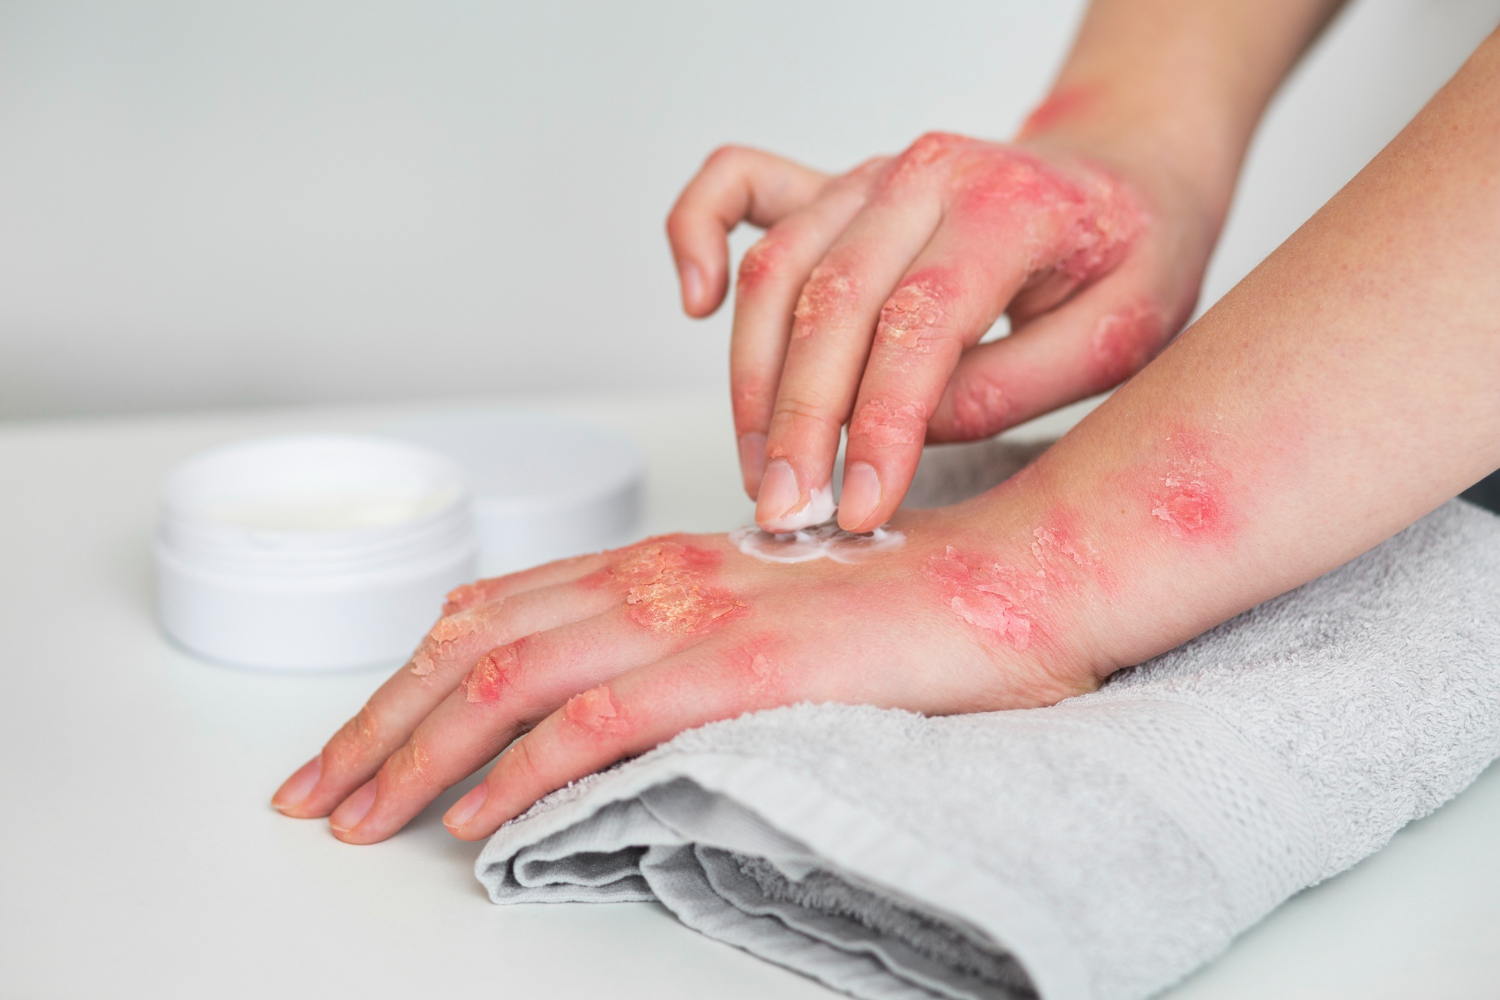 Discover Top Eczema Treatment Centers Near You for Effective Relief